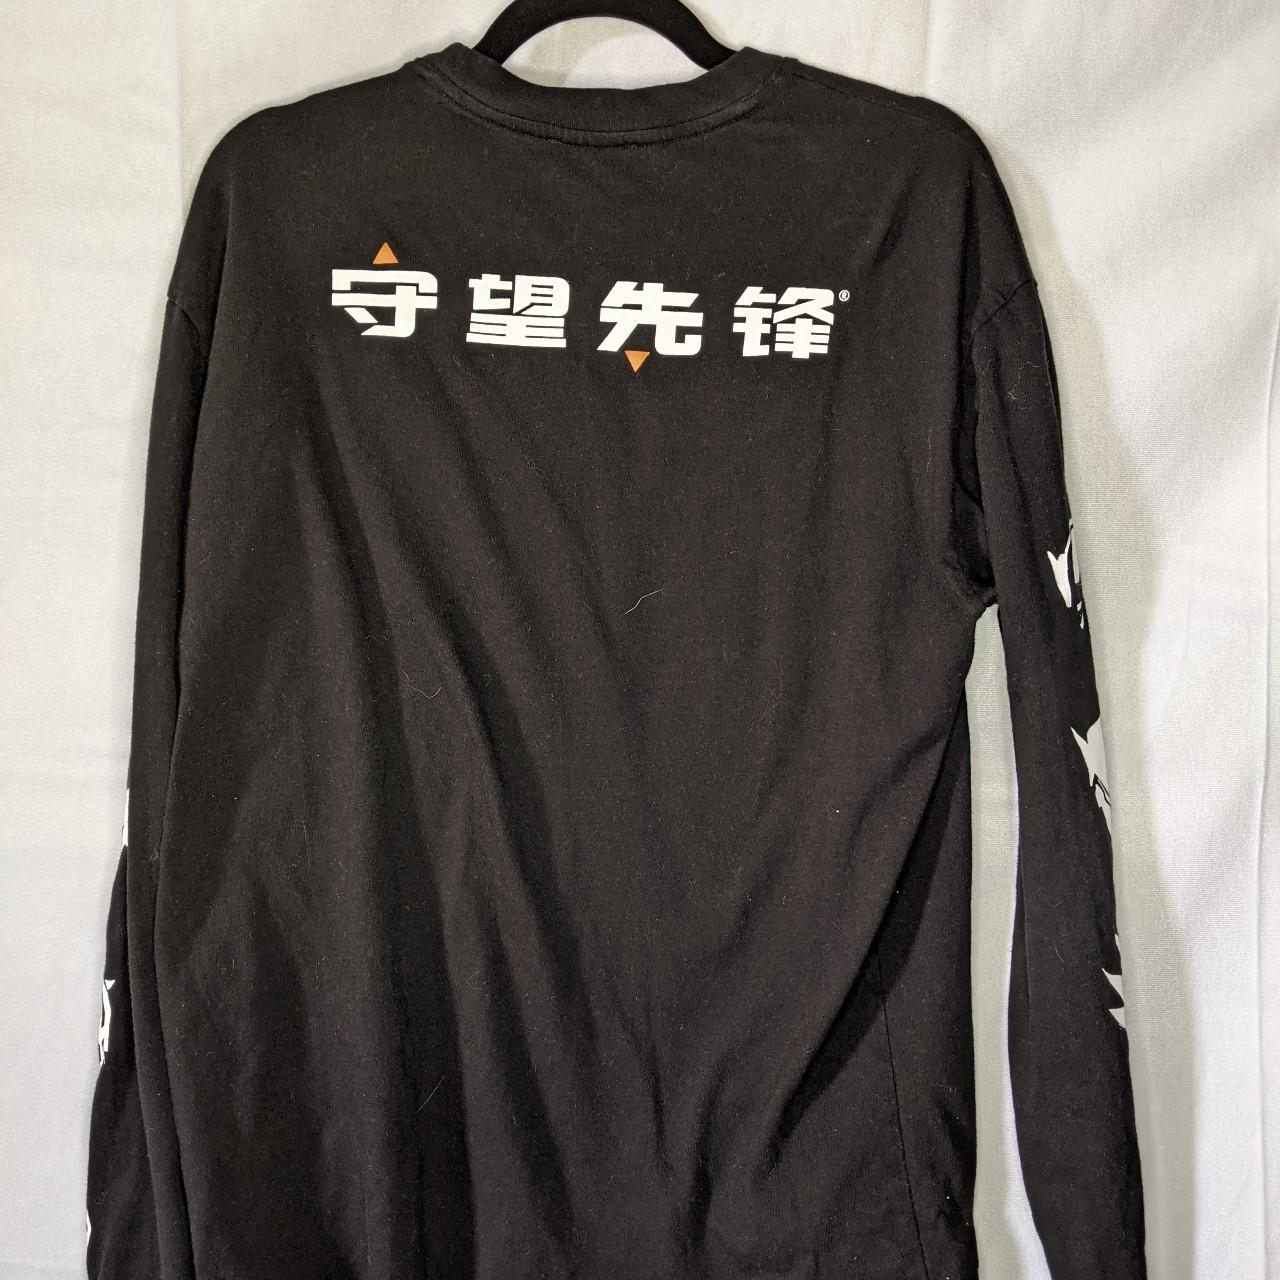 Product Image 2 - OVERWATCH LONG SLEEVE SMALL

#OVERWATCH #BLIZZARD